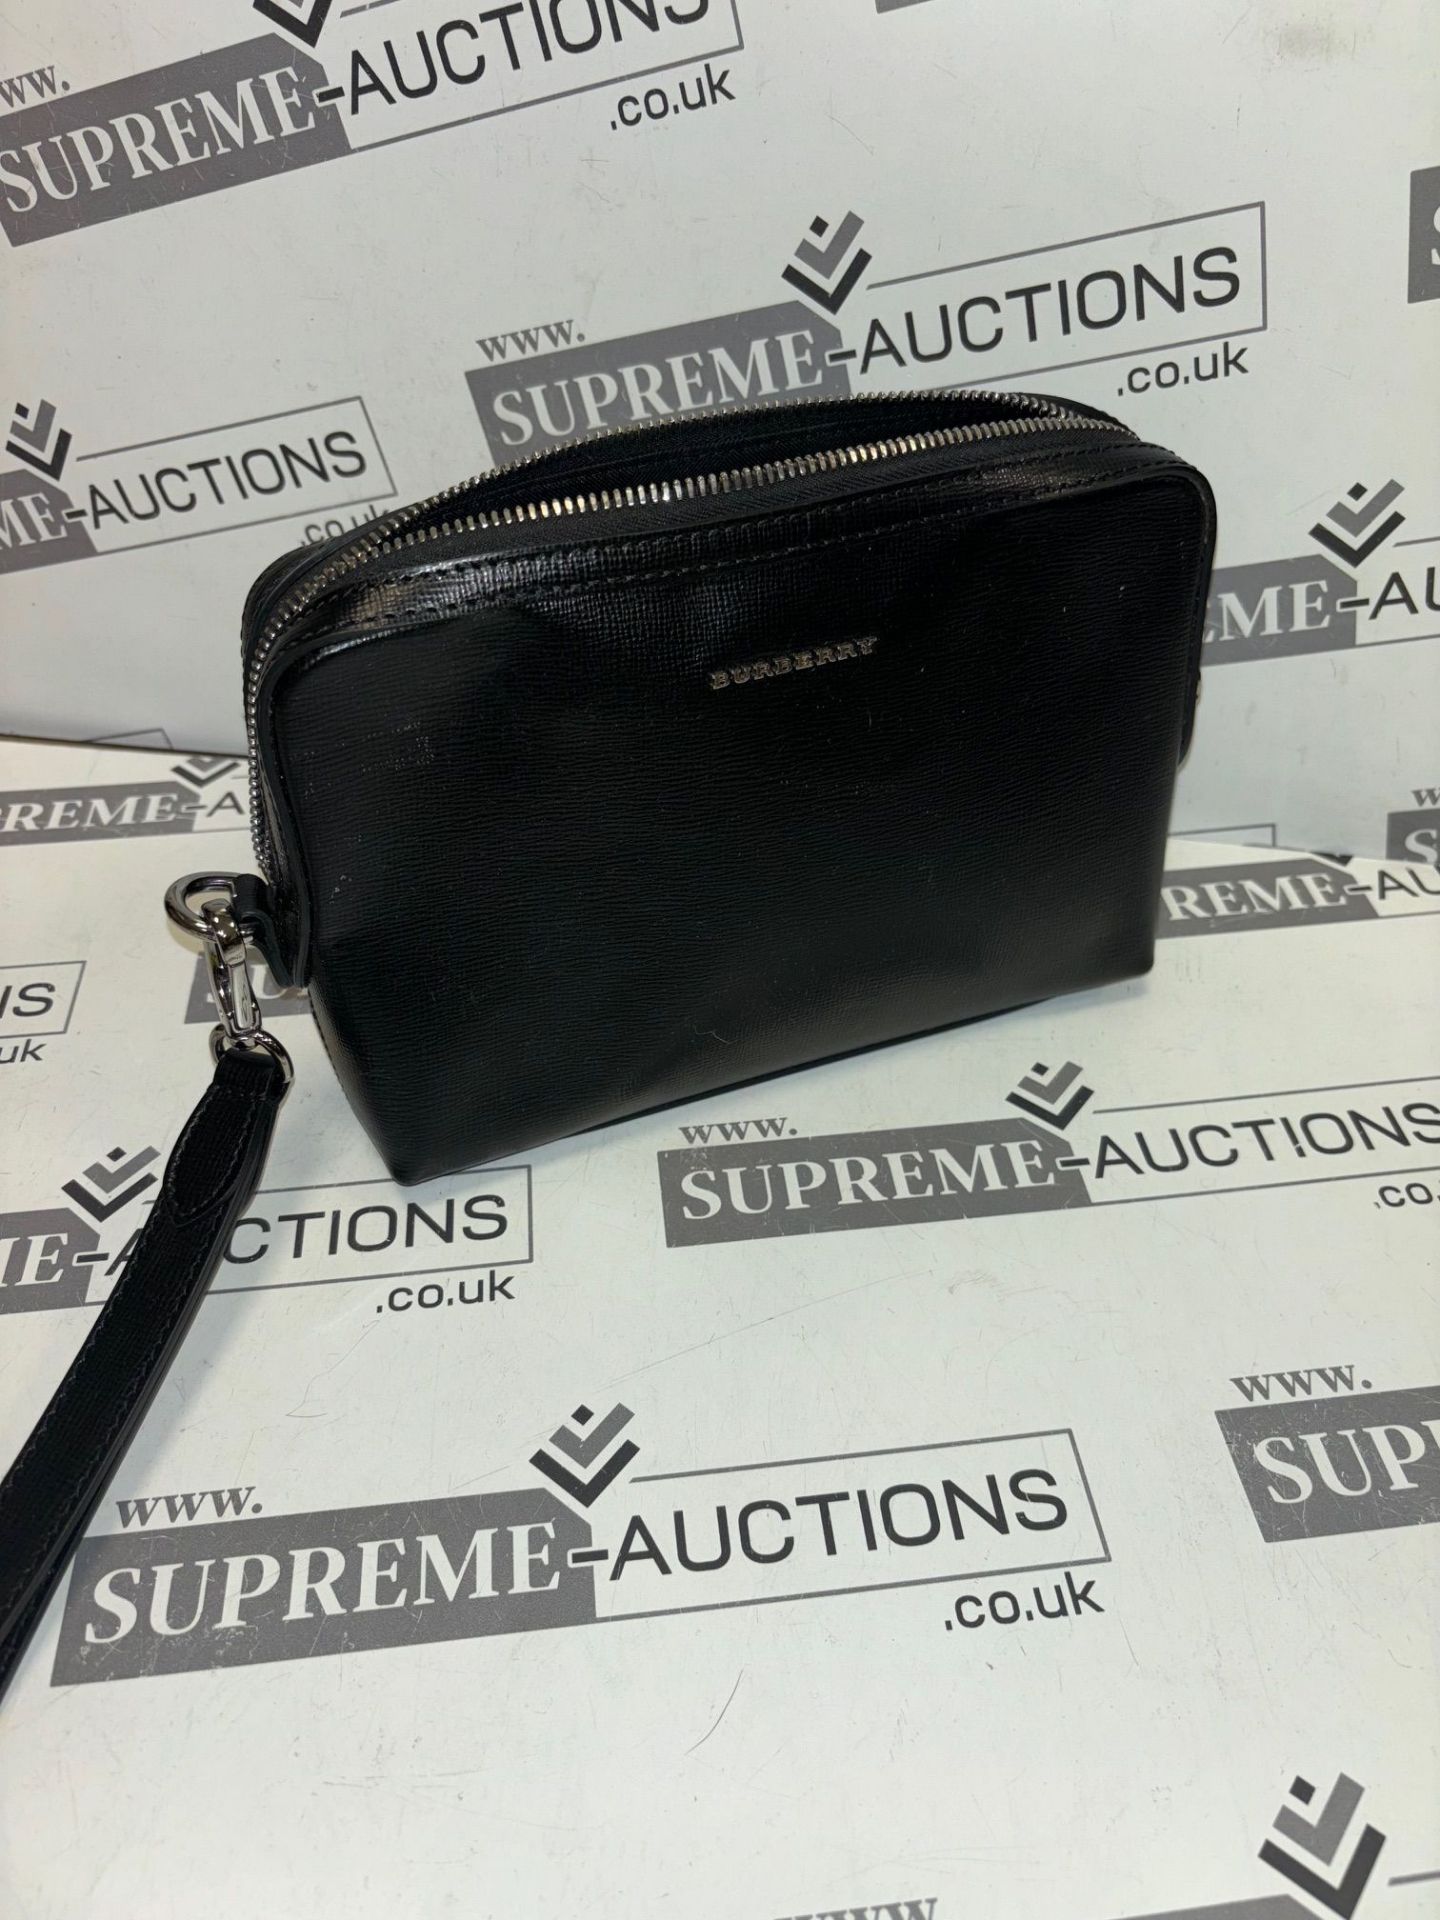 Genuine Burberry Saffiano Leather Clutch Bag In Black. RRP £885.00. - Image 2 of 5